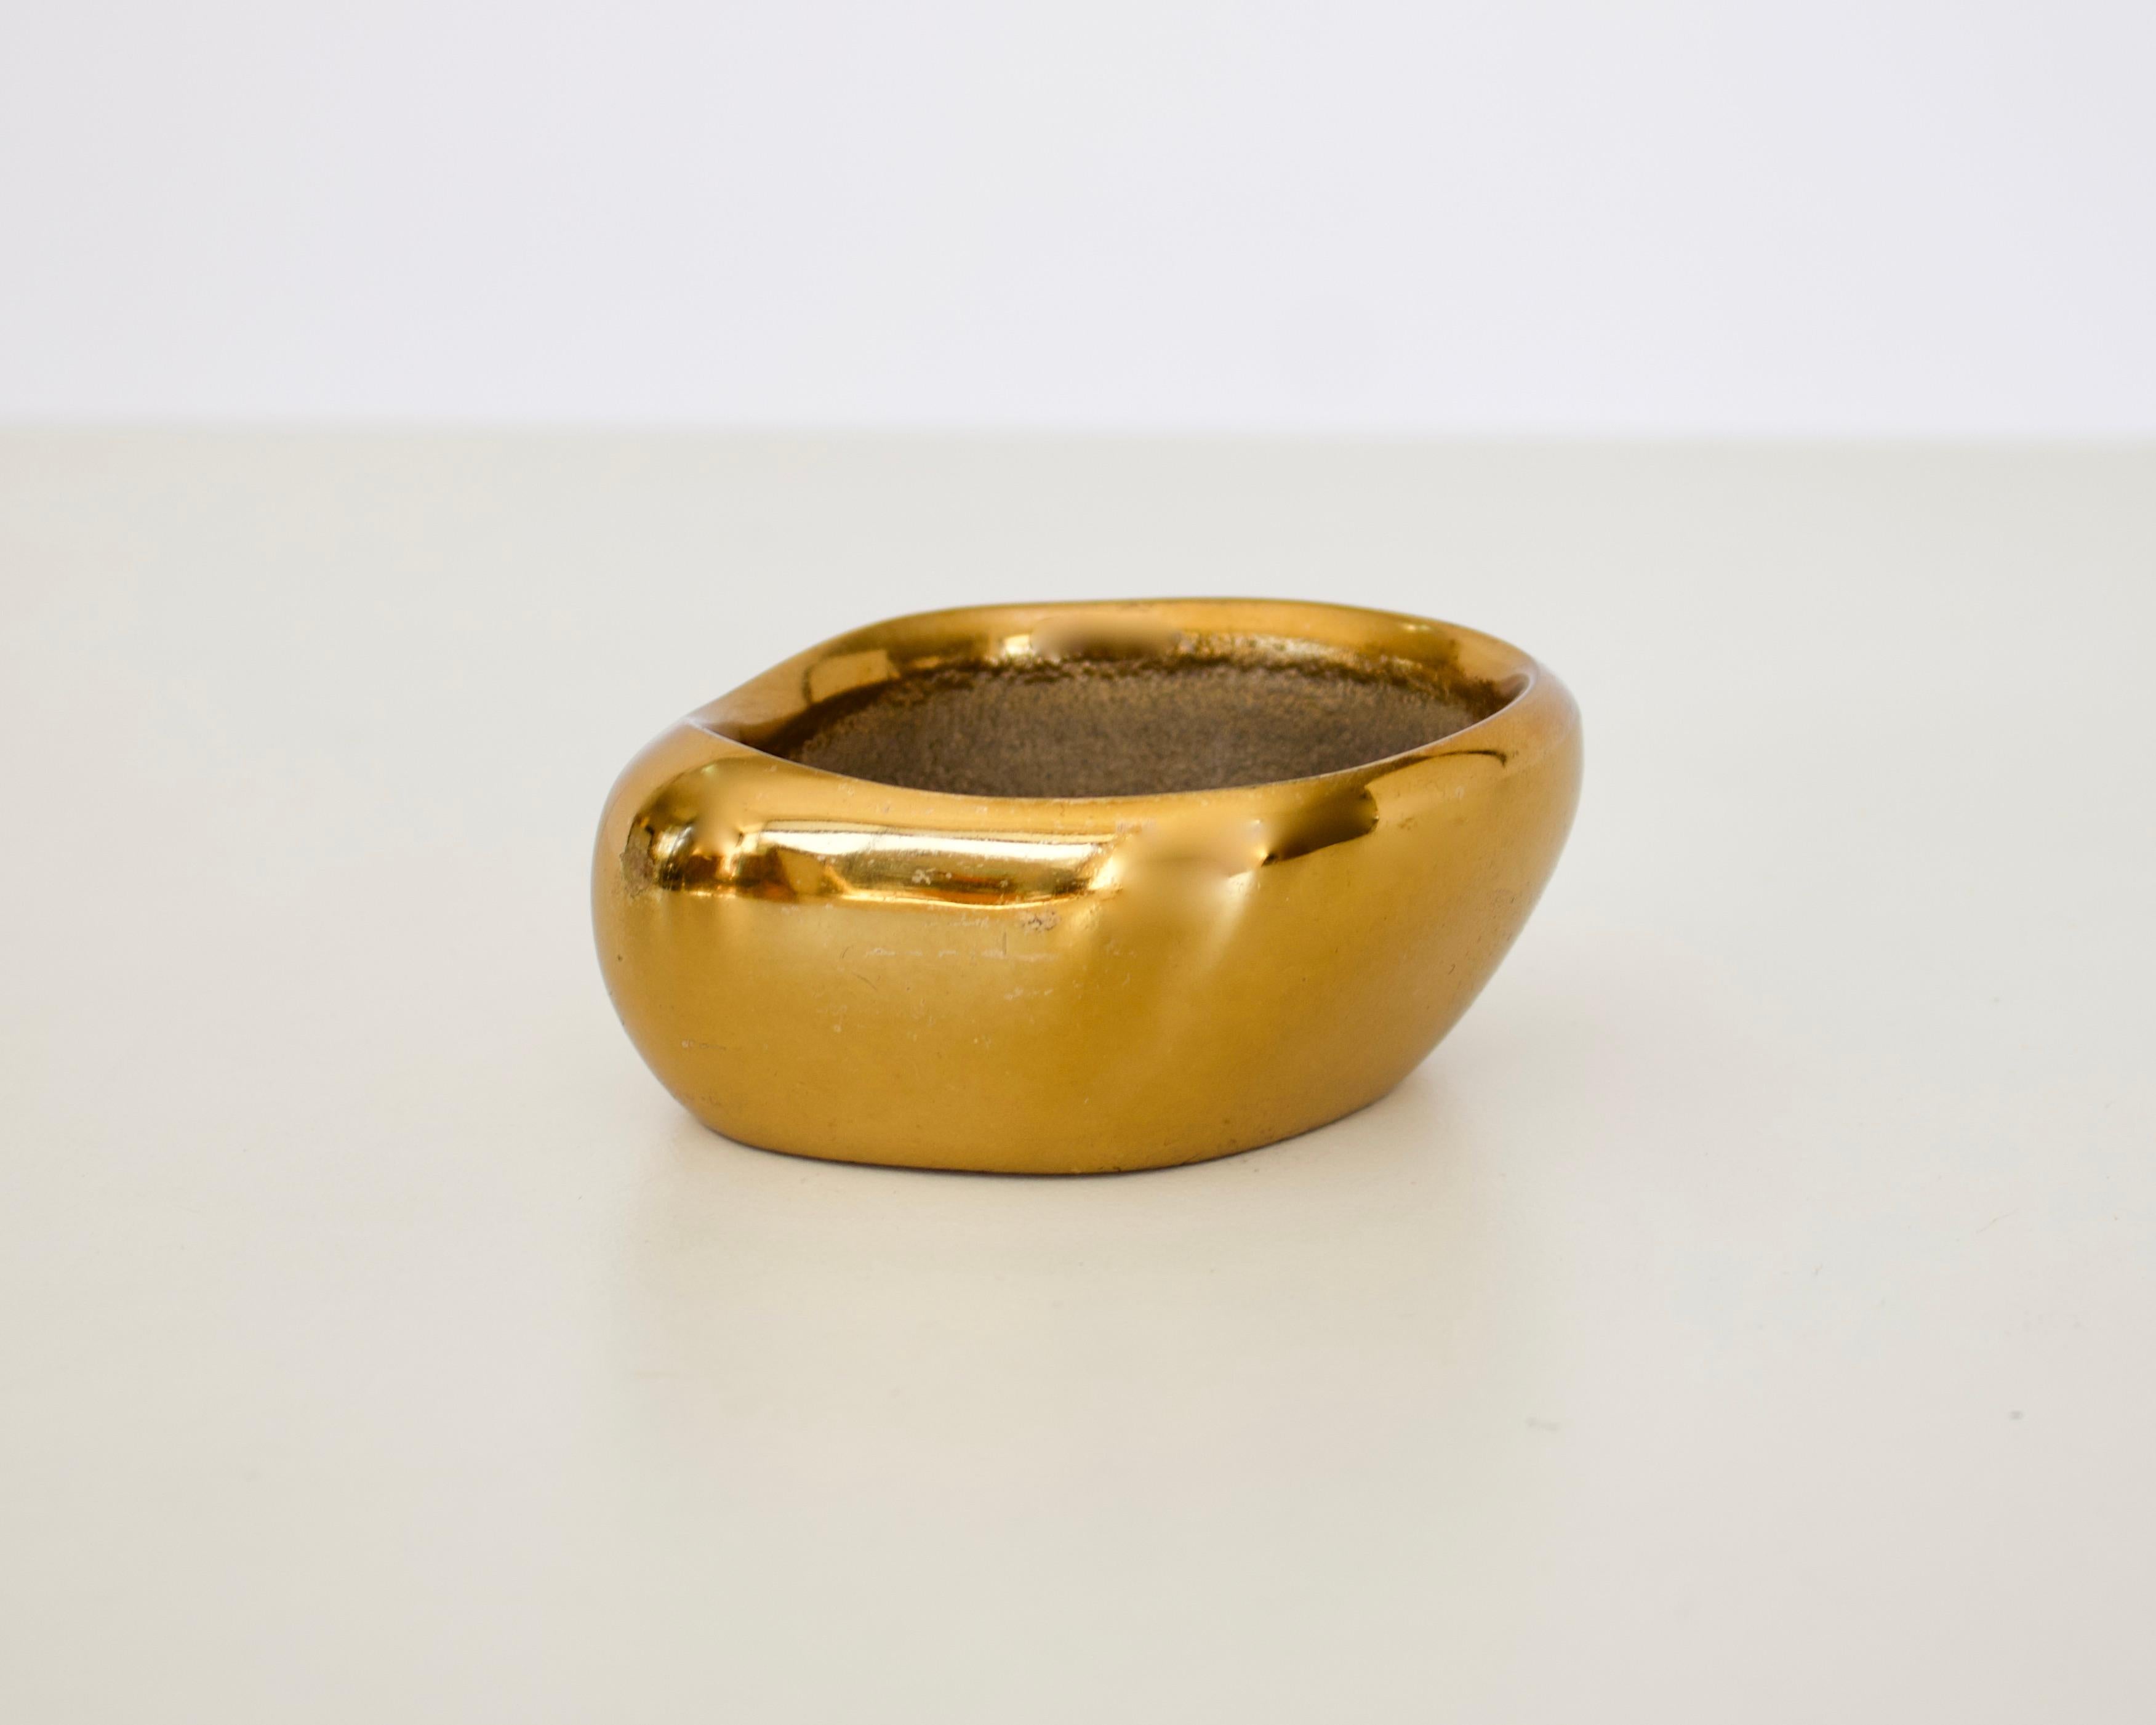 Late 20th Century French Bronze Vide Poche or Ashtray by Monique Gerber